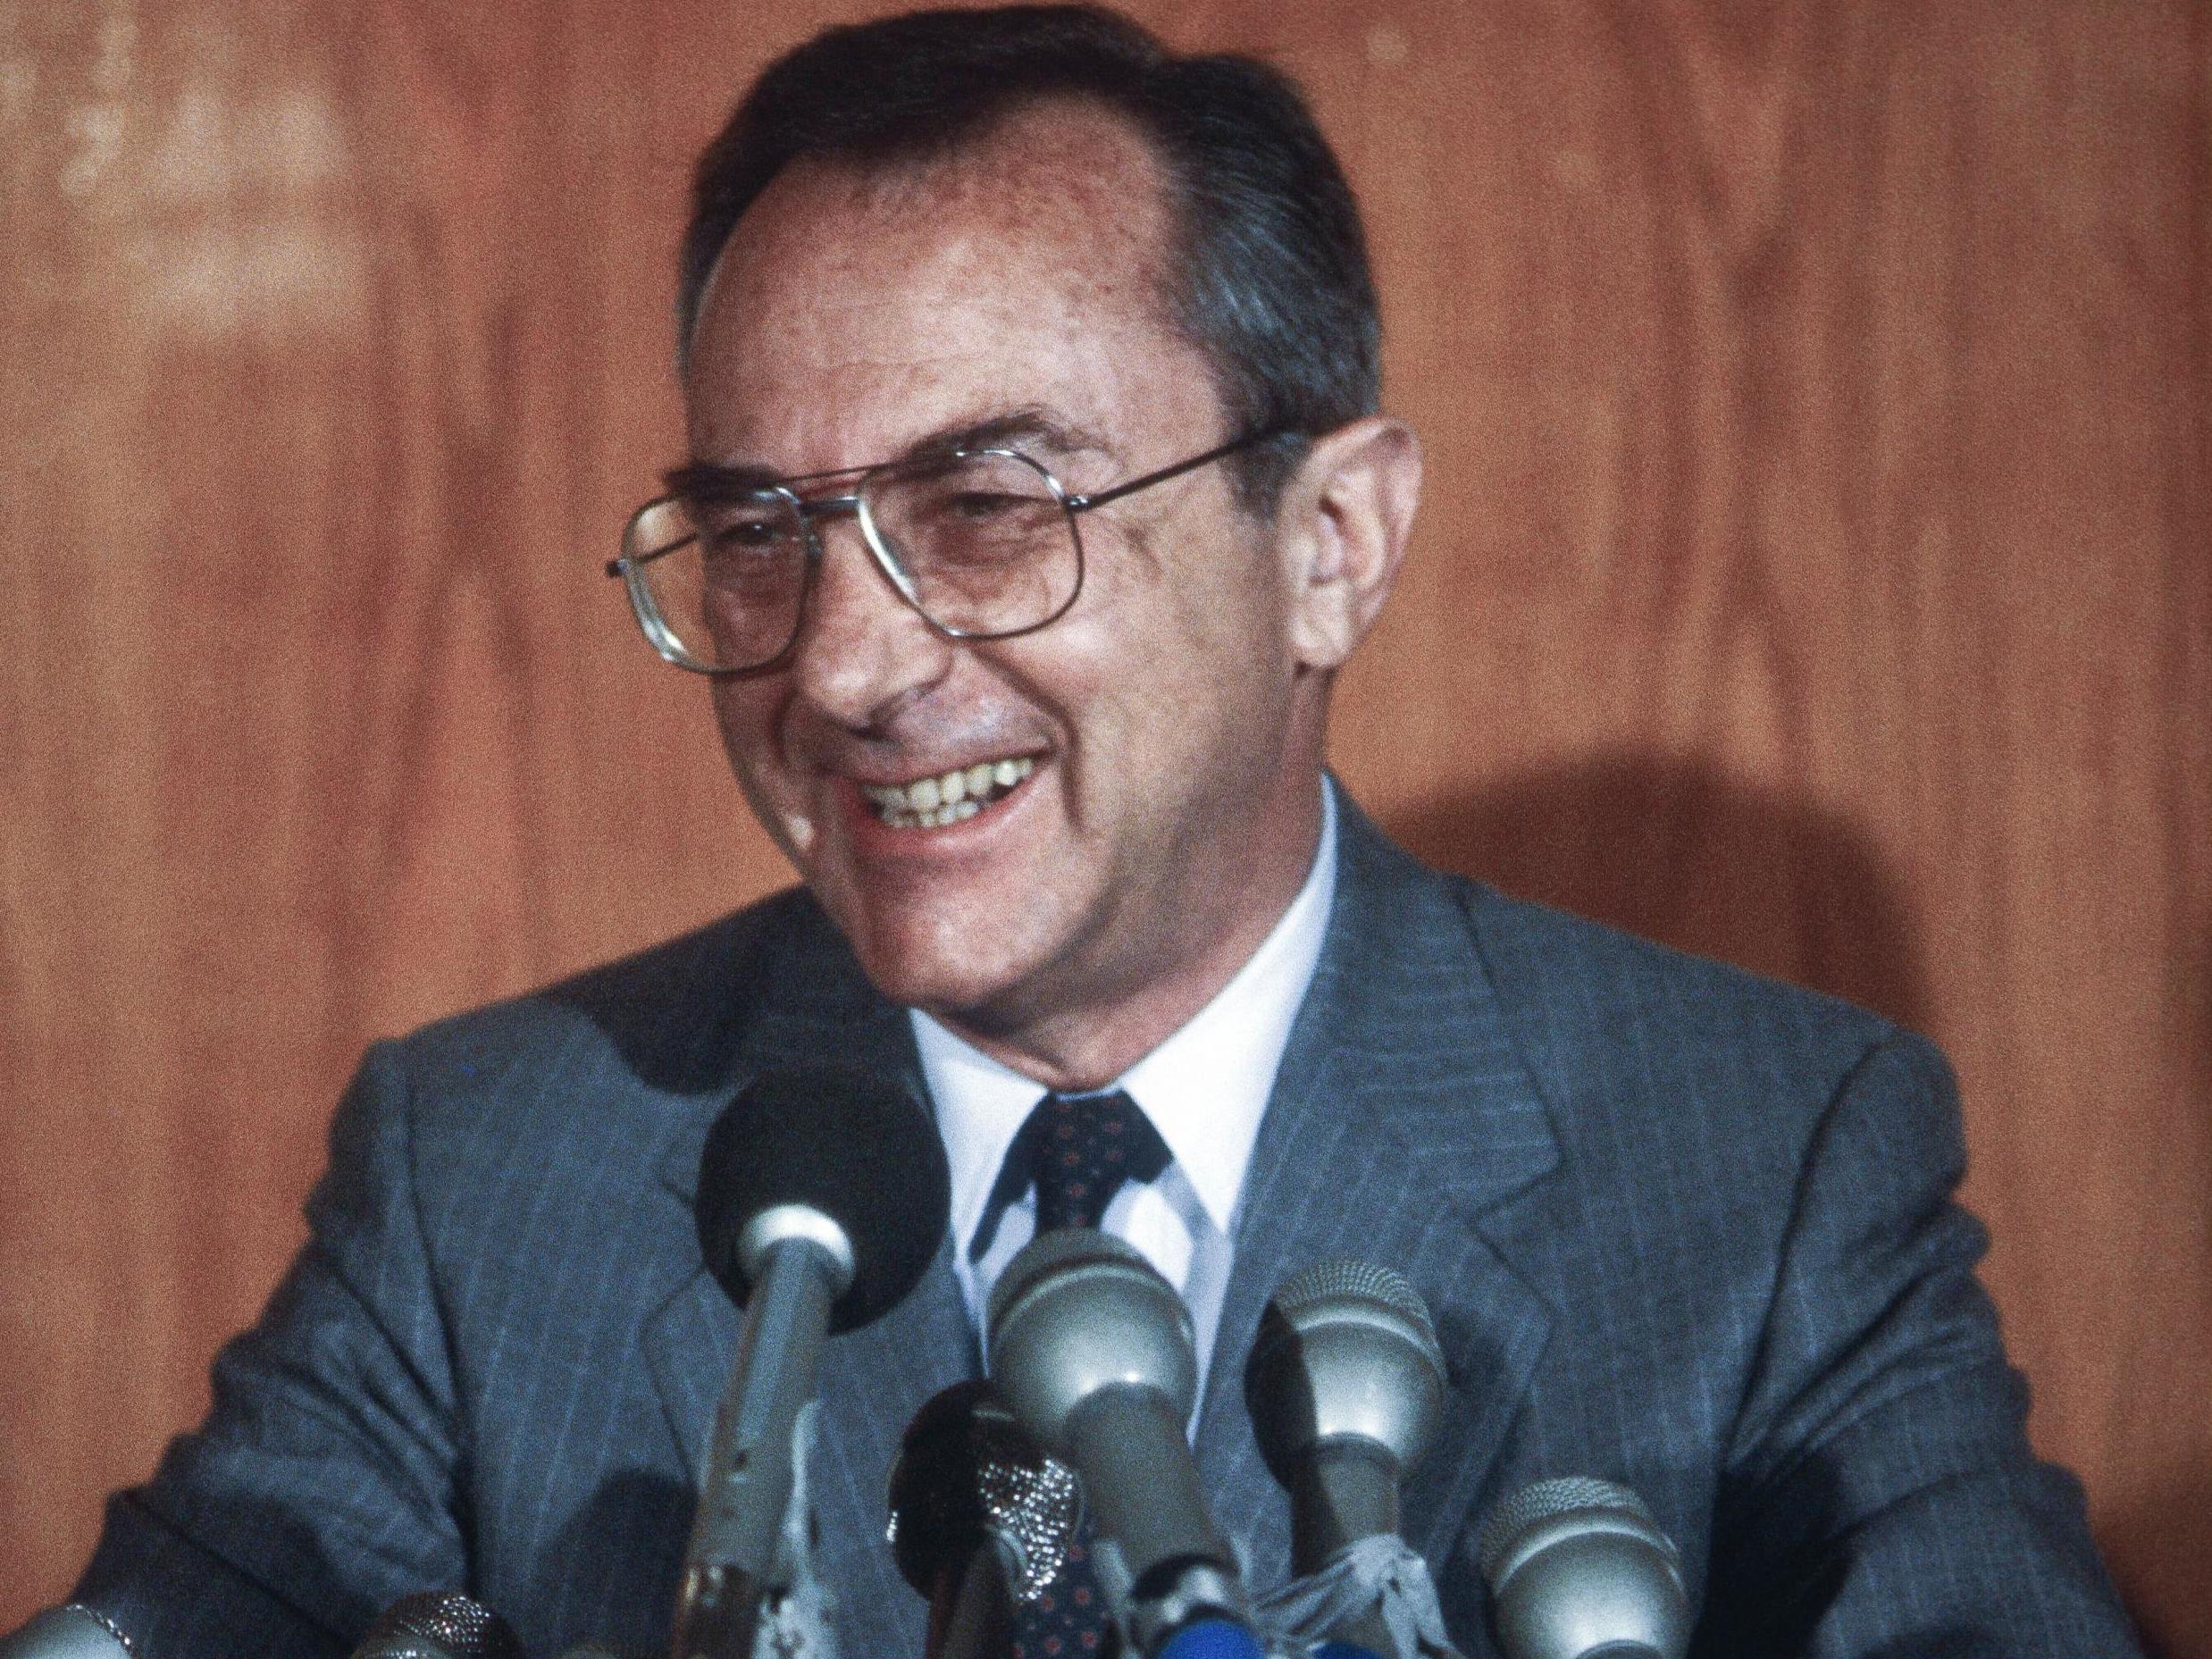 Arens in 1984: politically he was both a rightist and a liberal idealist, and was a champion of equal rights for Arab Israelis